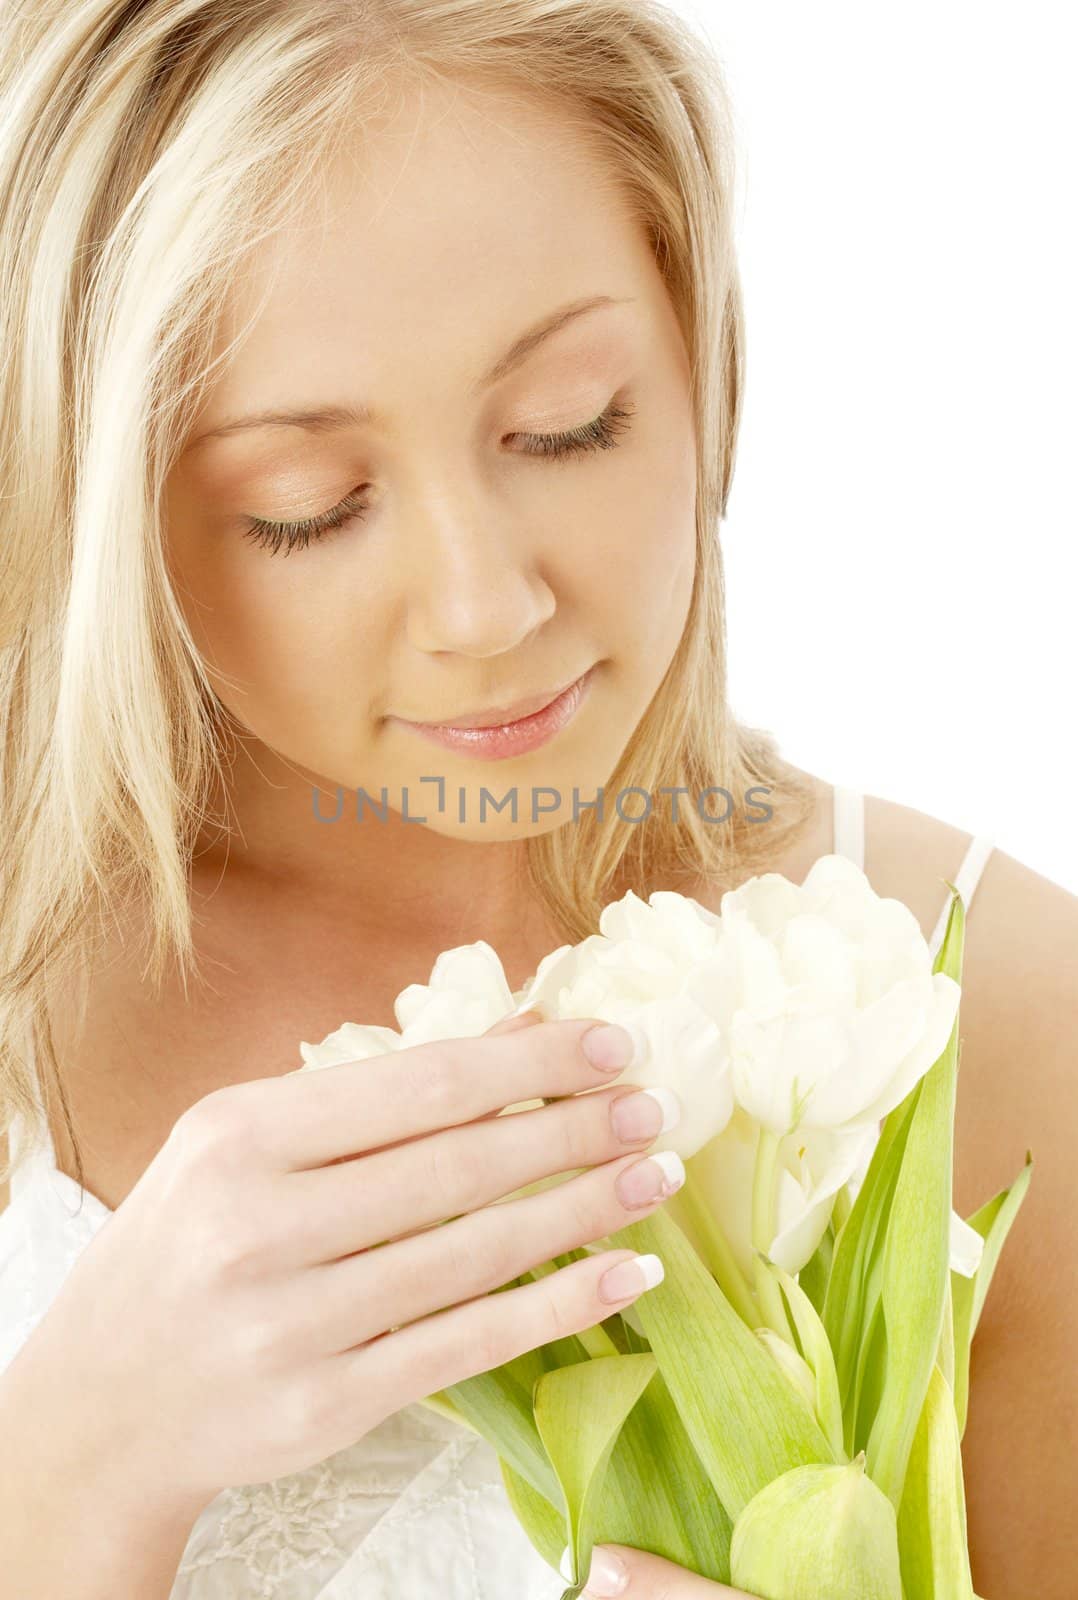 lovely blond with white tulips by dolgachov